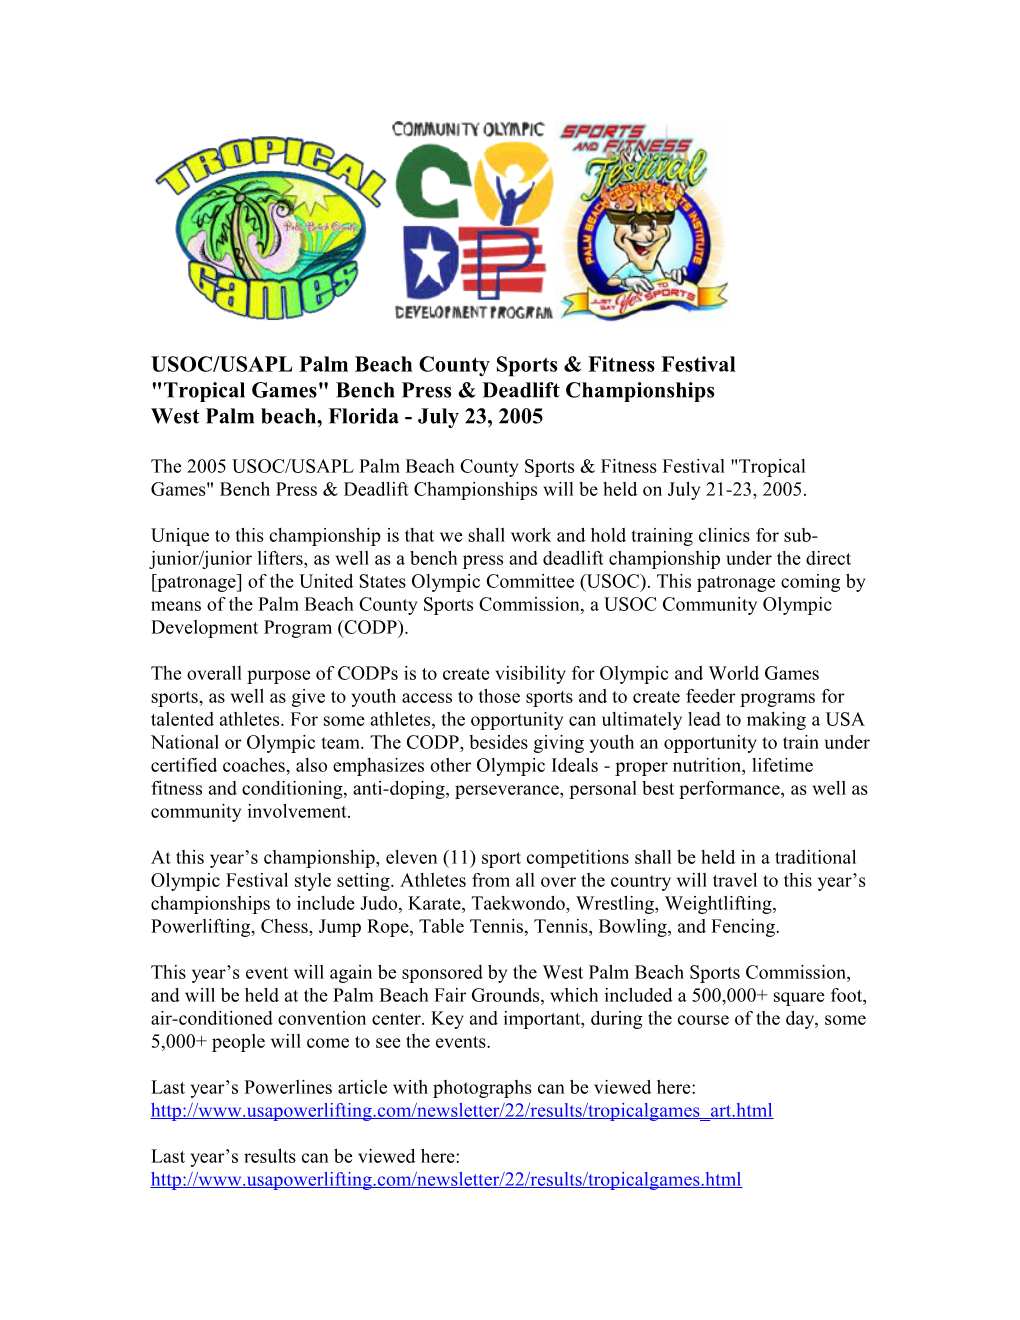 USOC/USAPL Palm Beach County Sports & Fitness Festival Tropical Games Bench Press & Deadlift